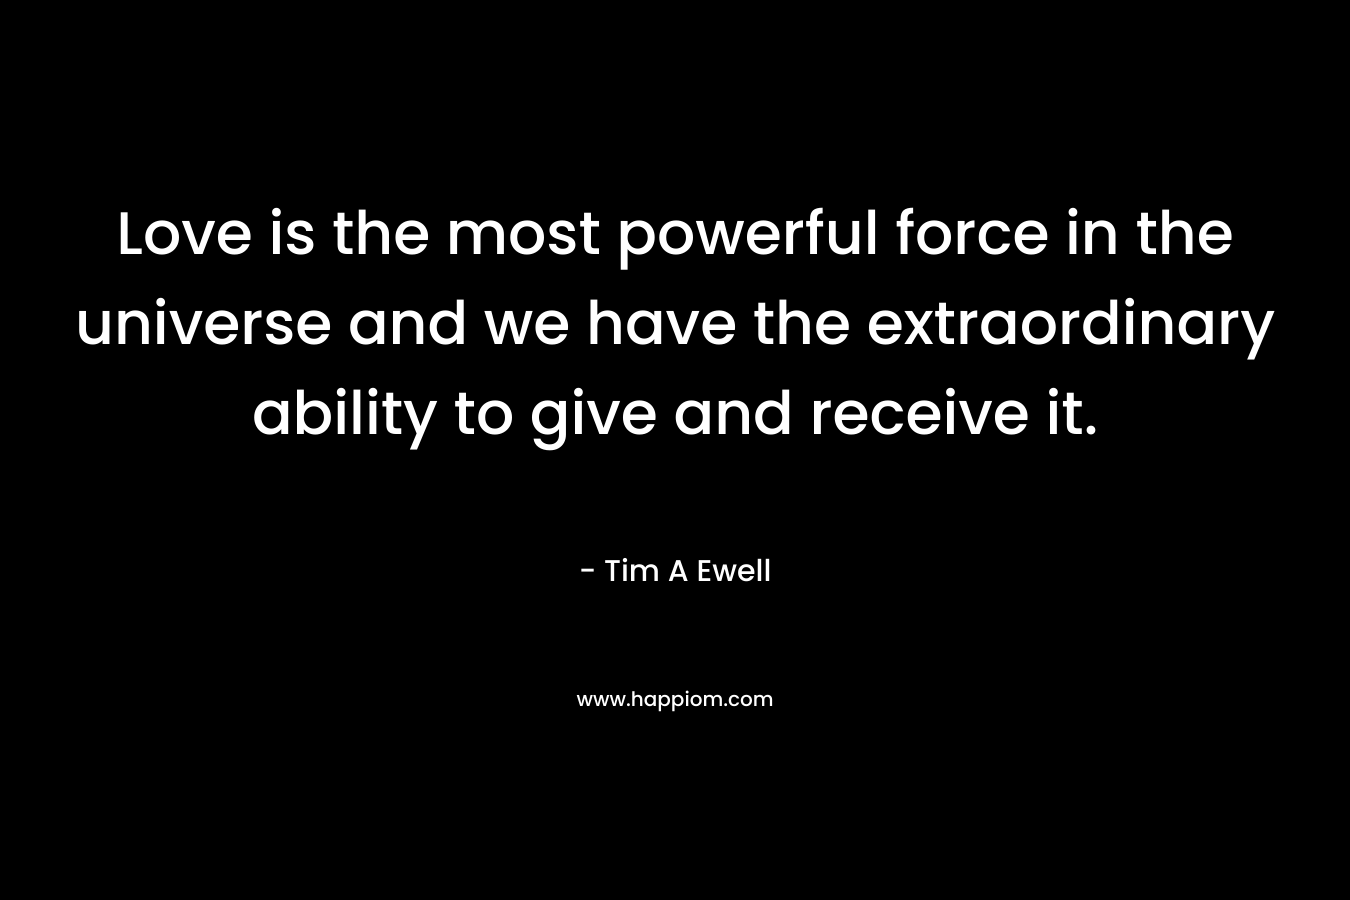 Love is the most powerful force in the universe and we have the extraordinary ability to give and receive it.